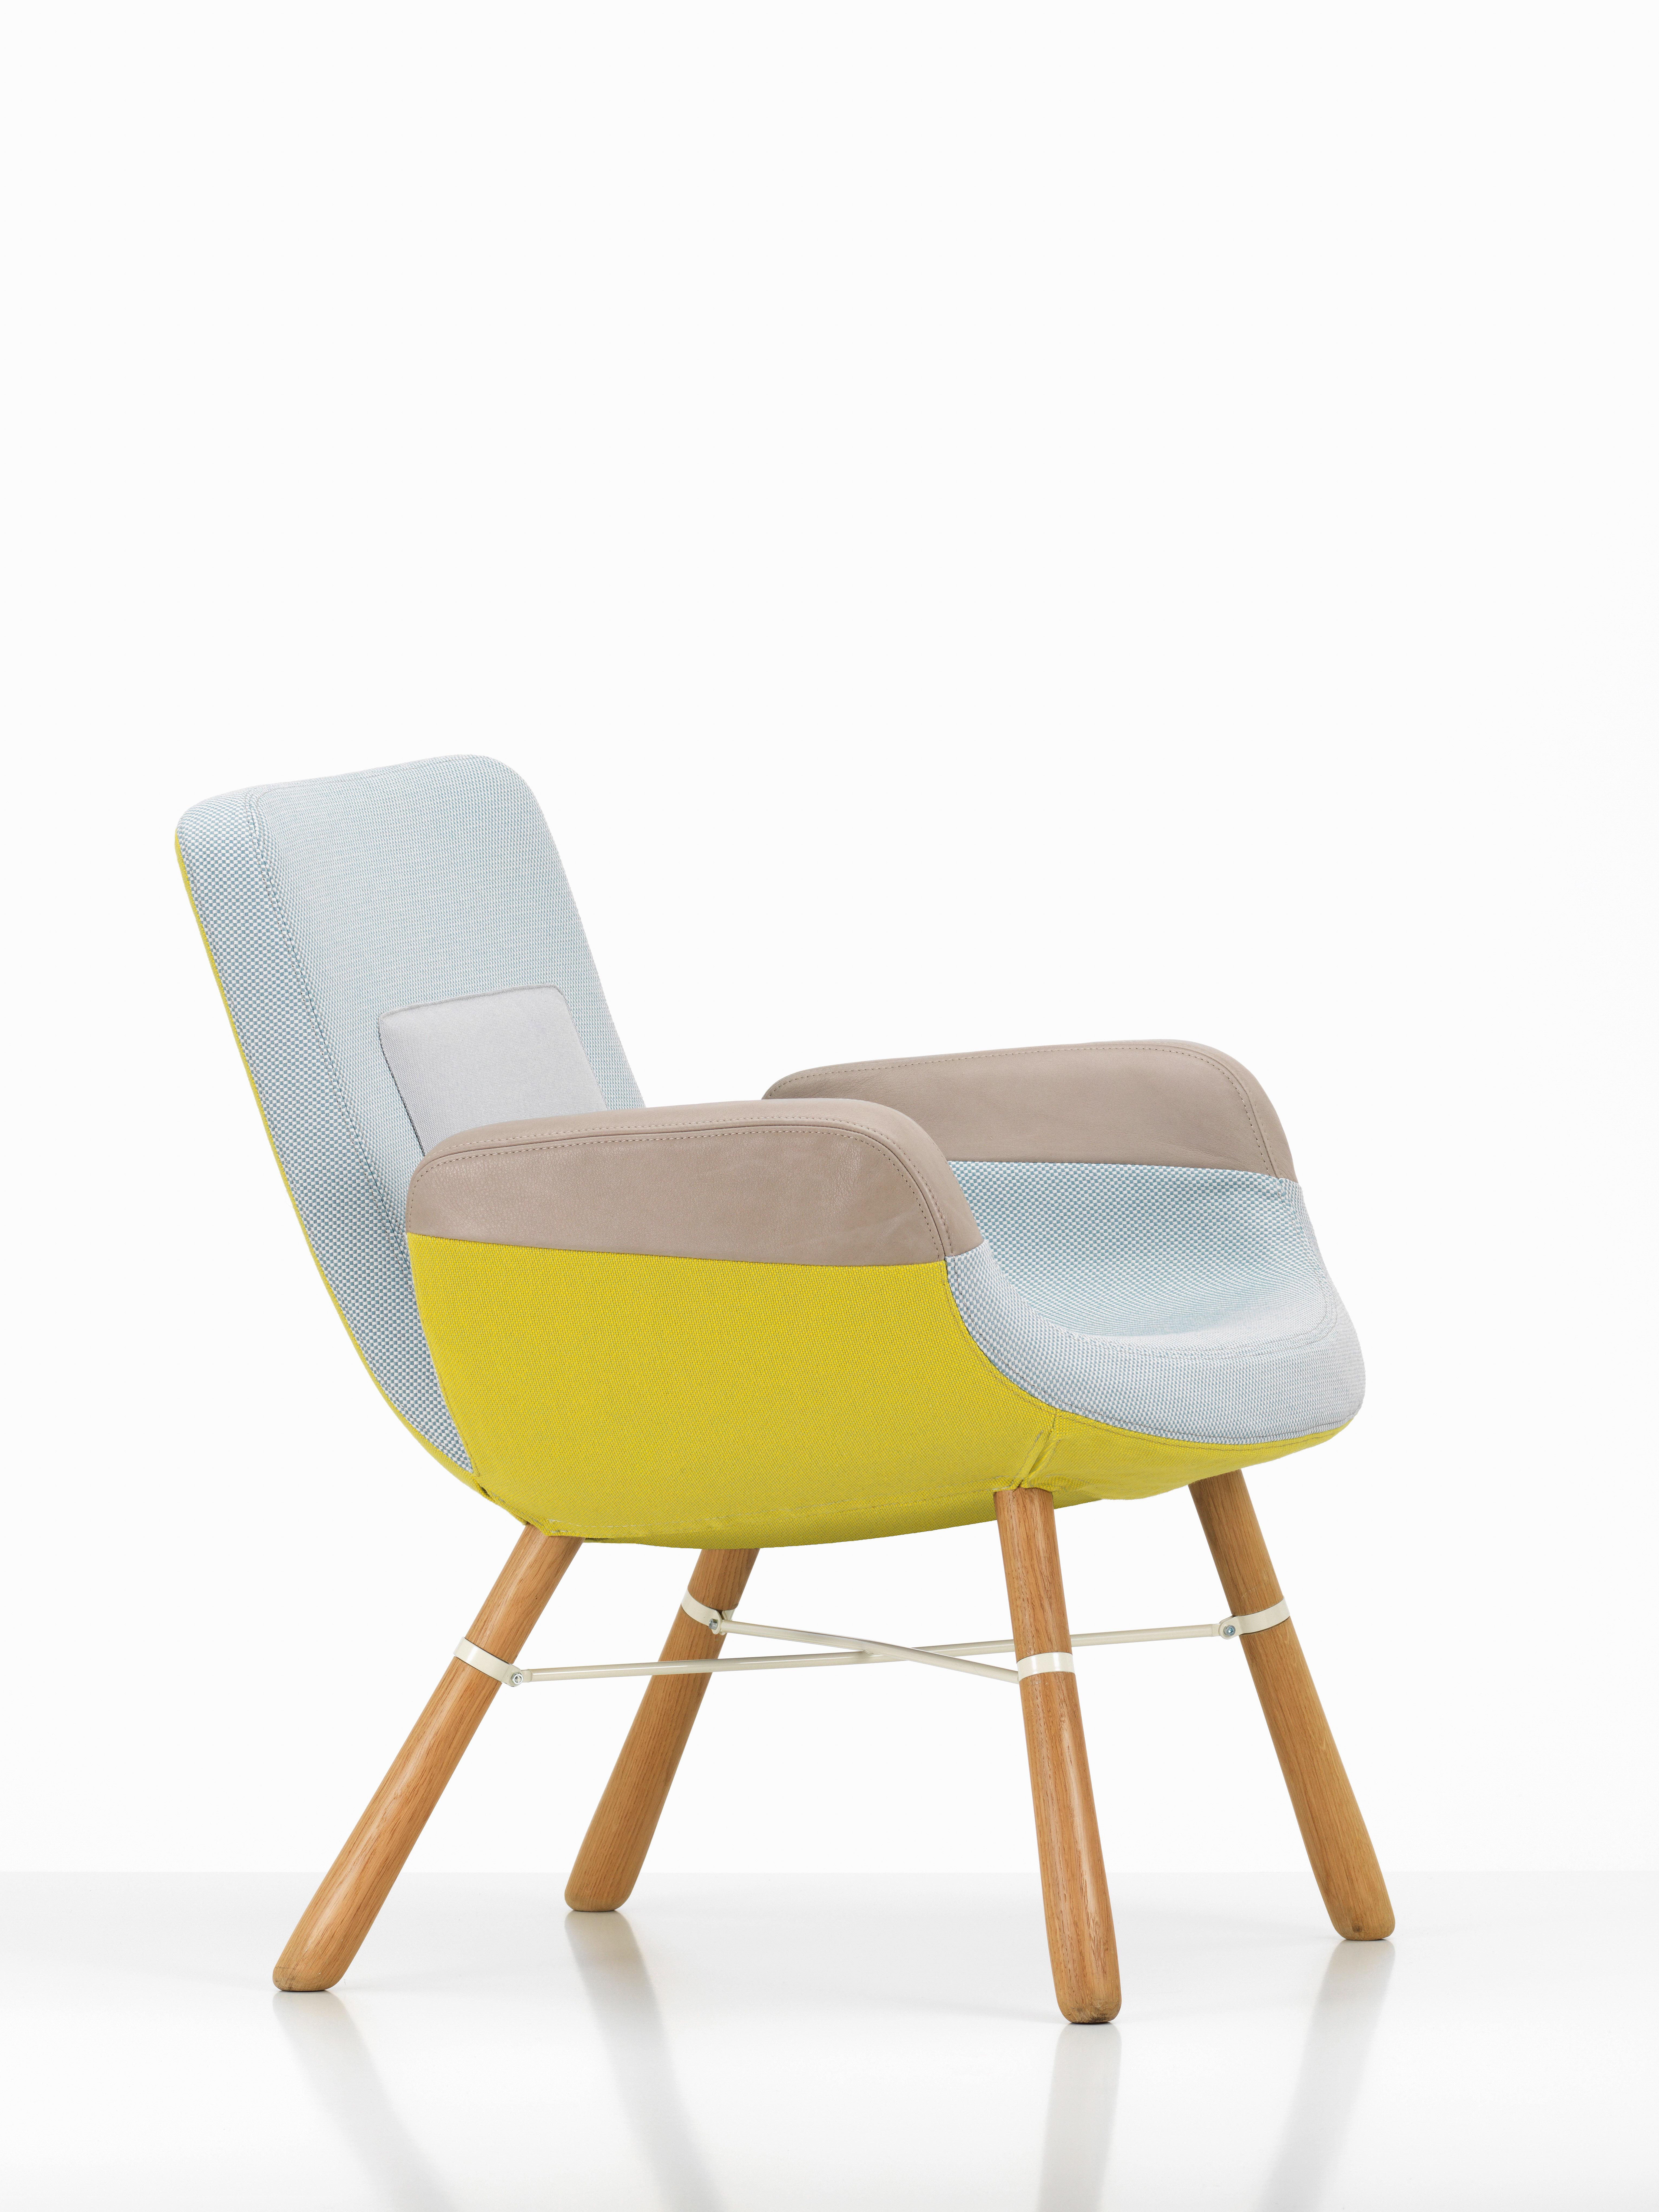 Varnished Vitra East River Chair in Light Combo Fabric with Oak Legs by Hella Jongerius For Sale